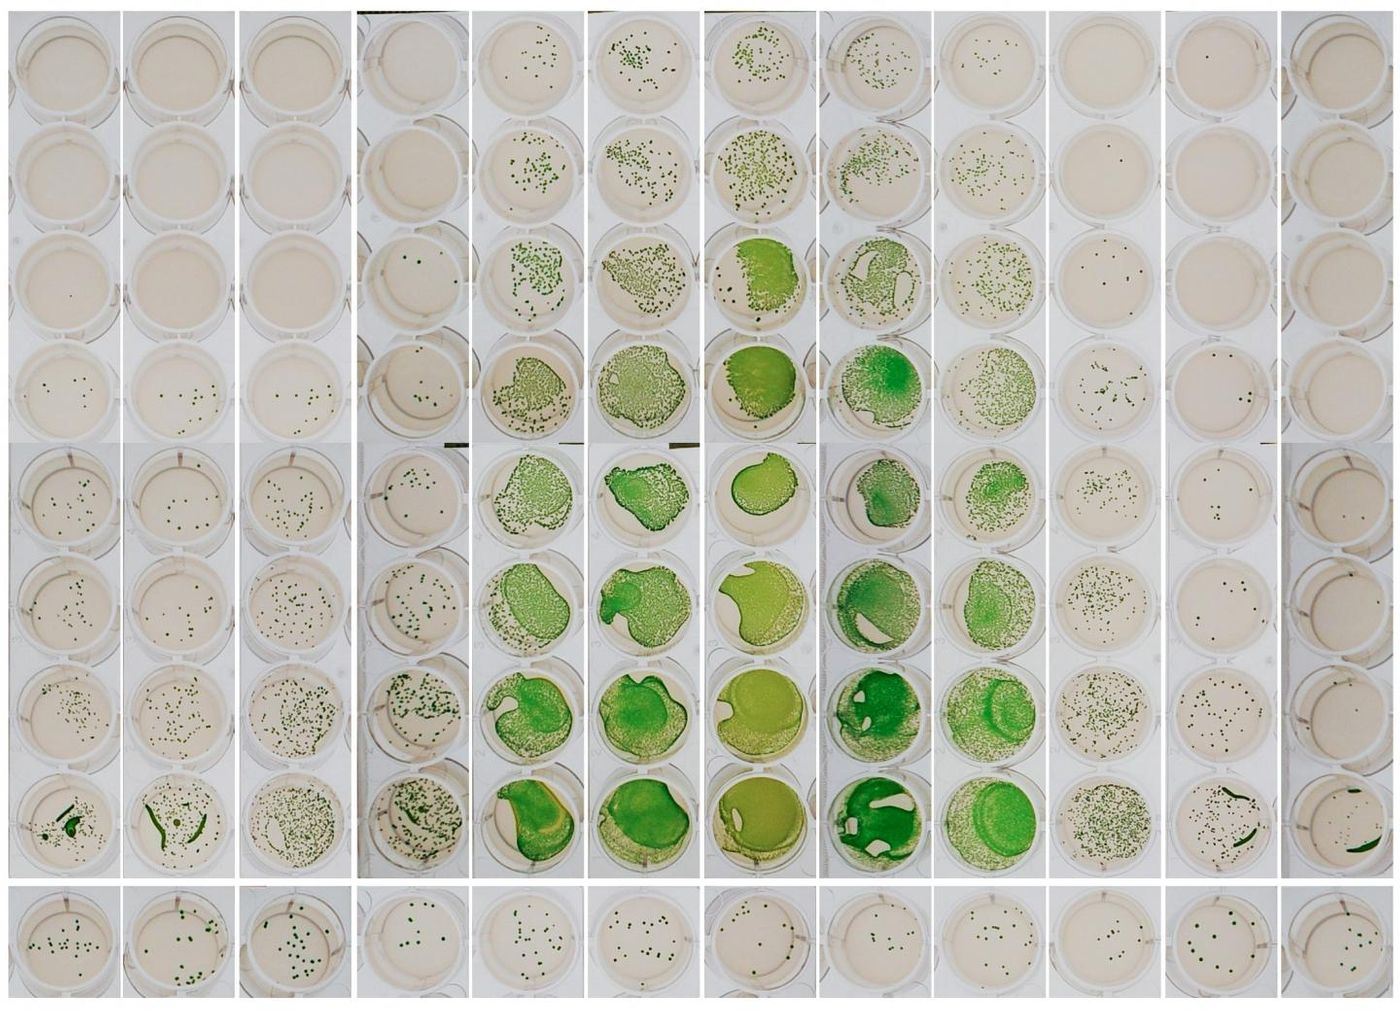 Columns show samples of cyanobacteria taken at different times of day and incubated with DNA that, if taken up and incorporated, allows them to grow on an antibiotic-containing medium. Green growth higher in the column shows more cells have taken up DNA. The samples in the center, around dusk and early night, are thousands of times better at taking up DNA than samples at dawn (left and right edges). / Credit: Golden Lab, UC San Diego